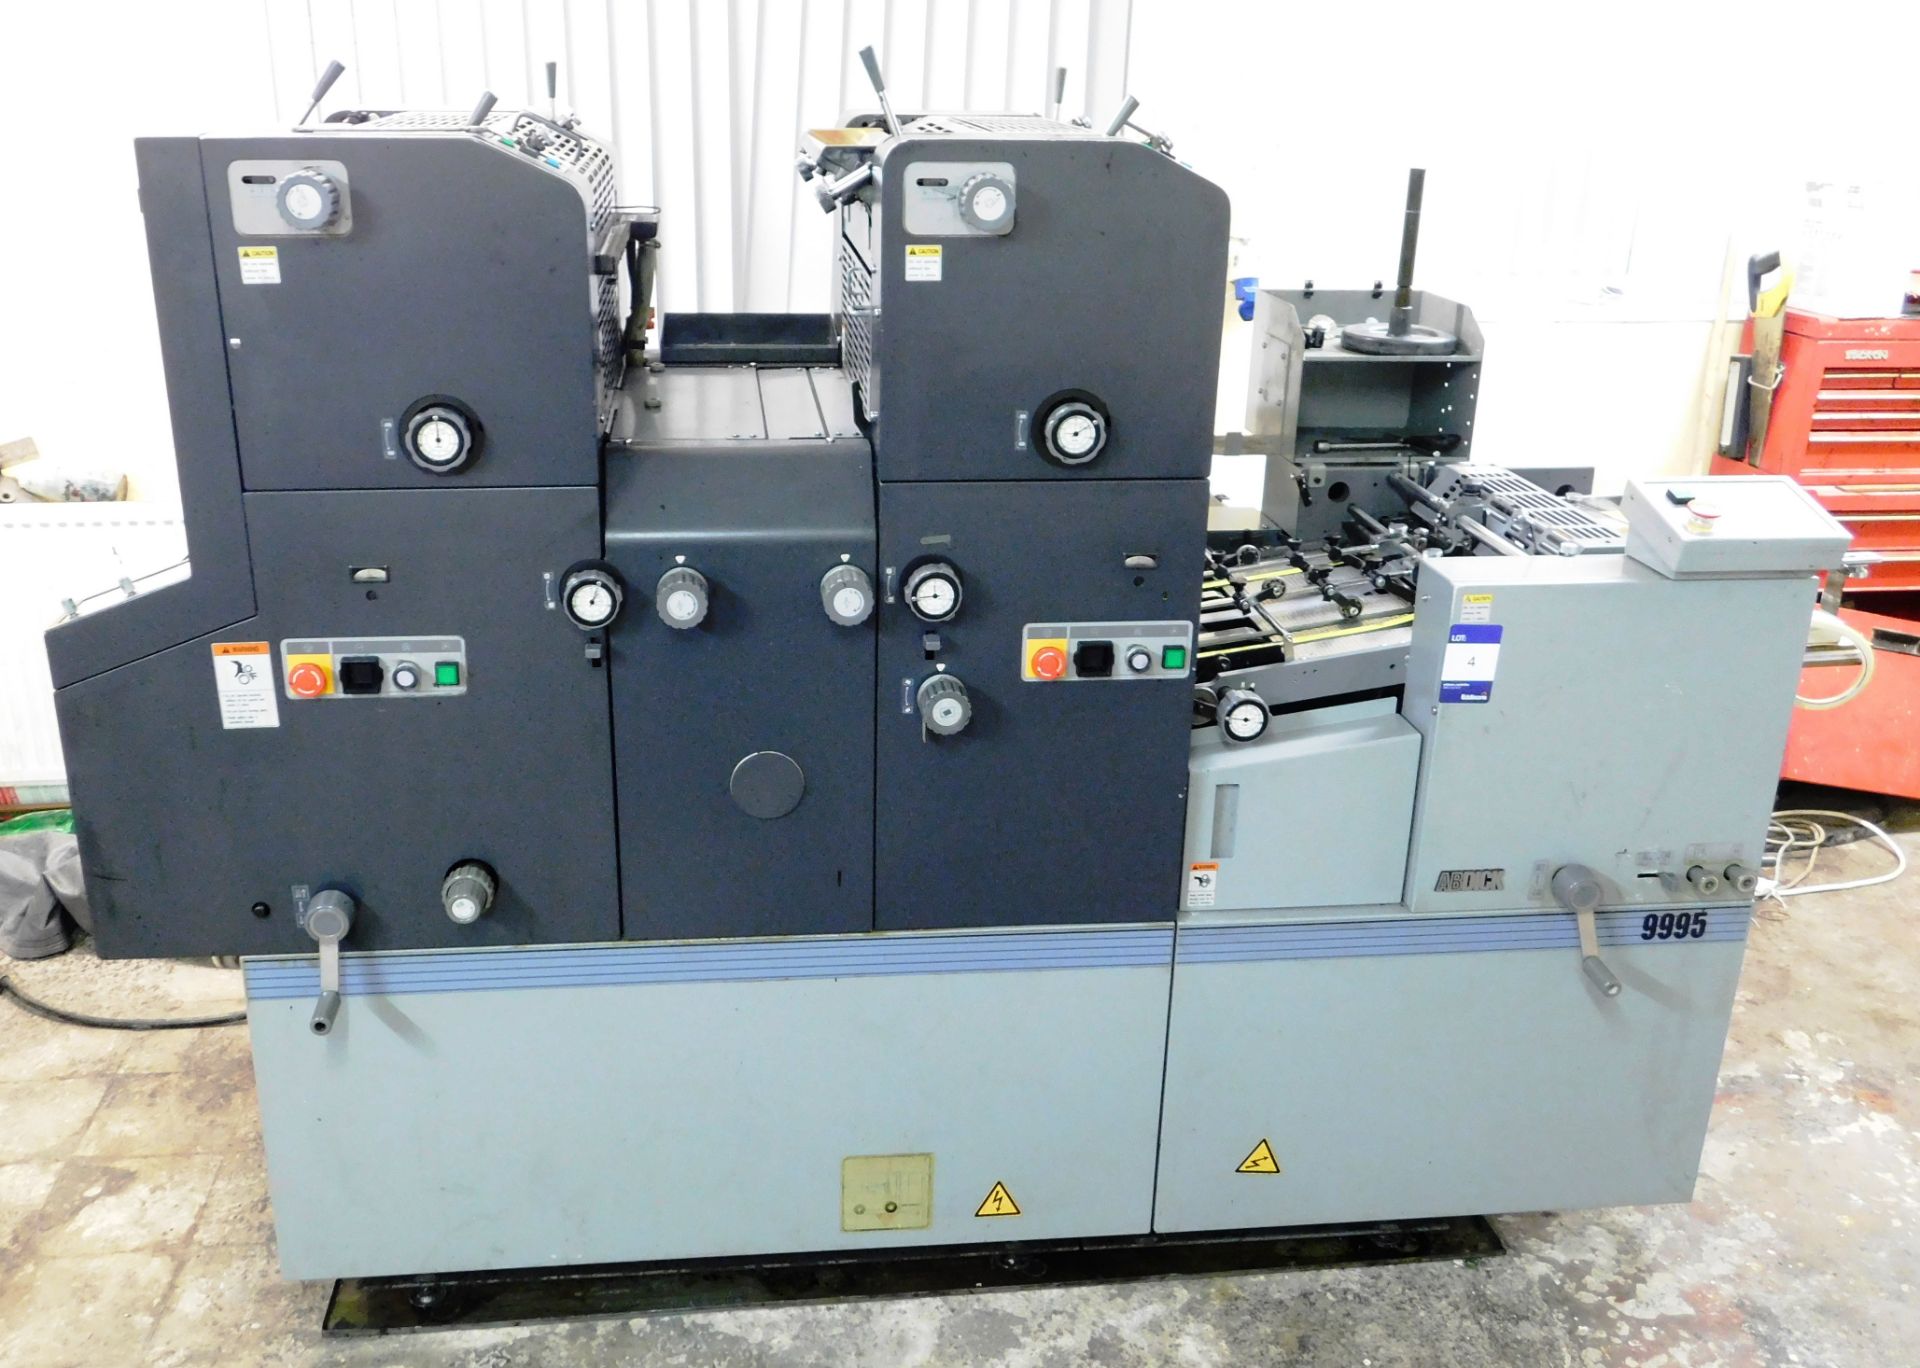 Ryobi Two Color Offset Press Model 9995 Serial Number 2068 (2001) Single Phase (329888imp) - Image 2 of 7